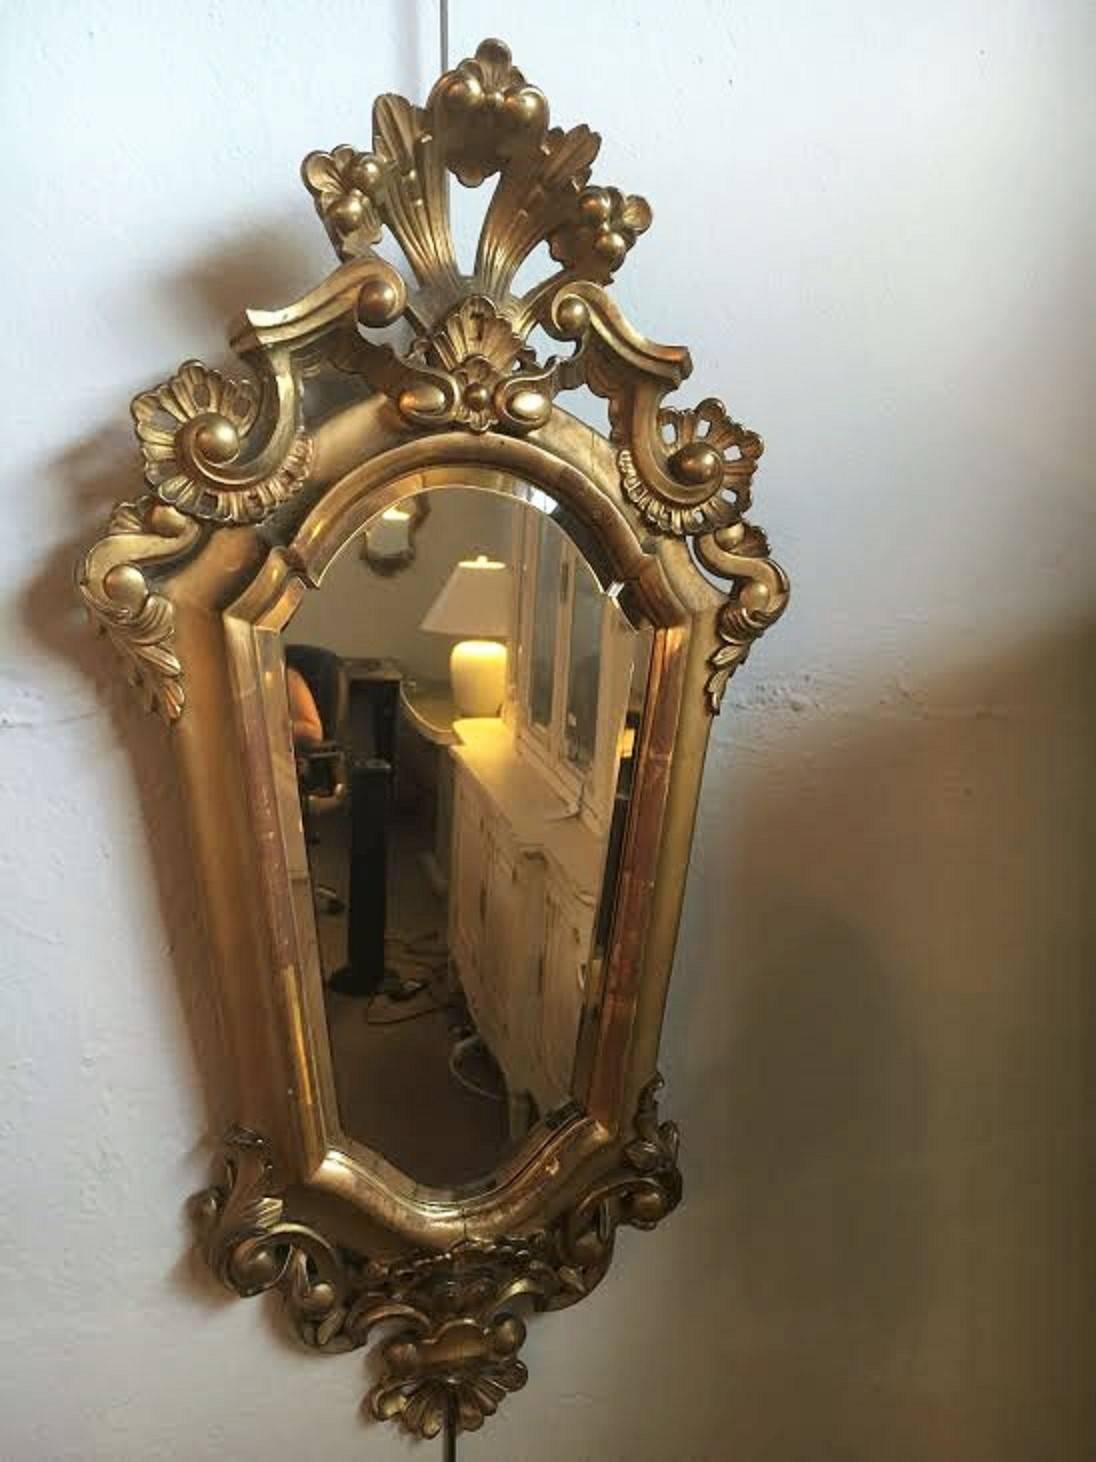 Pair of Italian gilt carved mirrors beveled glass conforming to frames. Open pediment, top and bottom. Each of these beveled finely frames mirror are small enough to place in any area of the home where decorative style is needed.